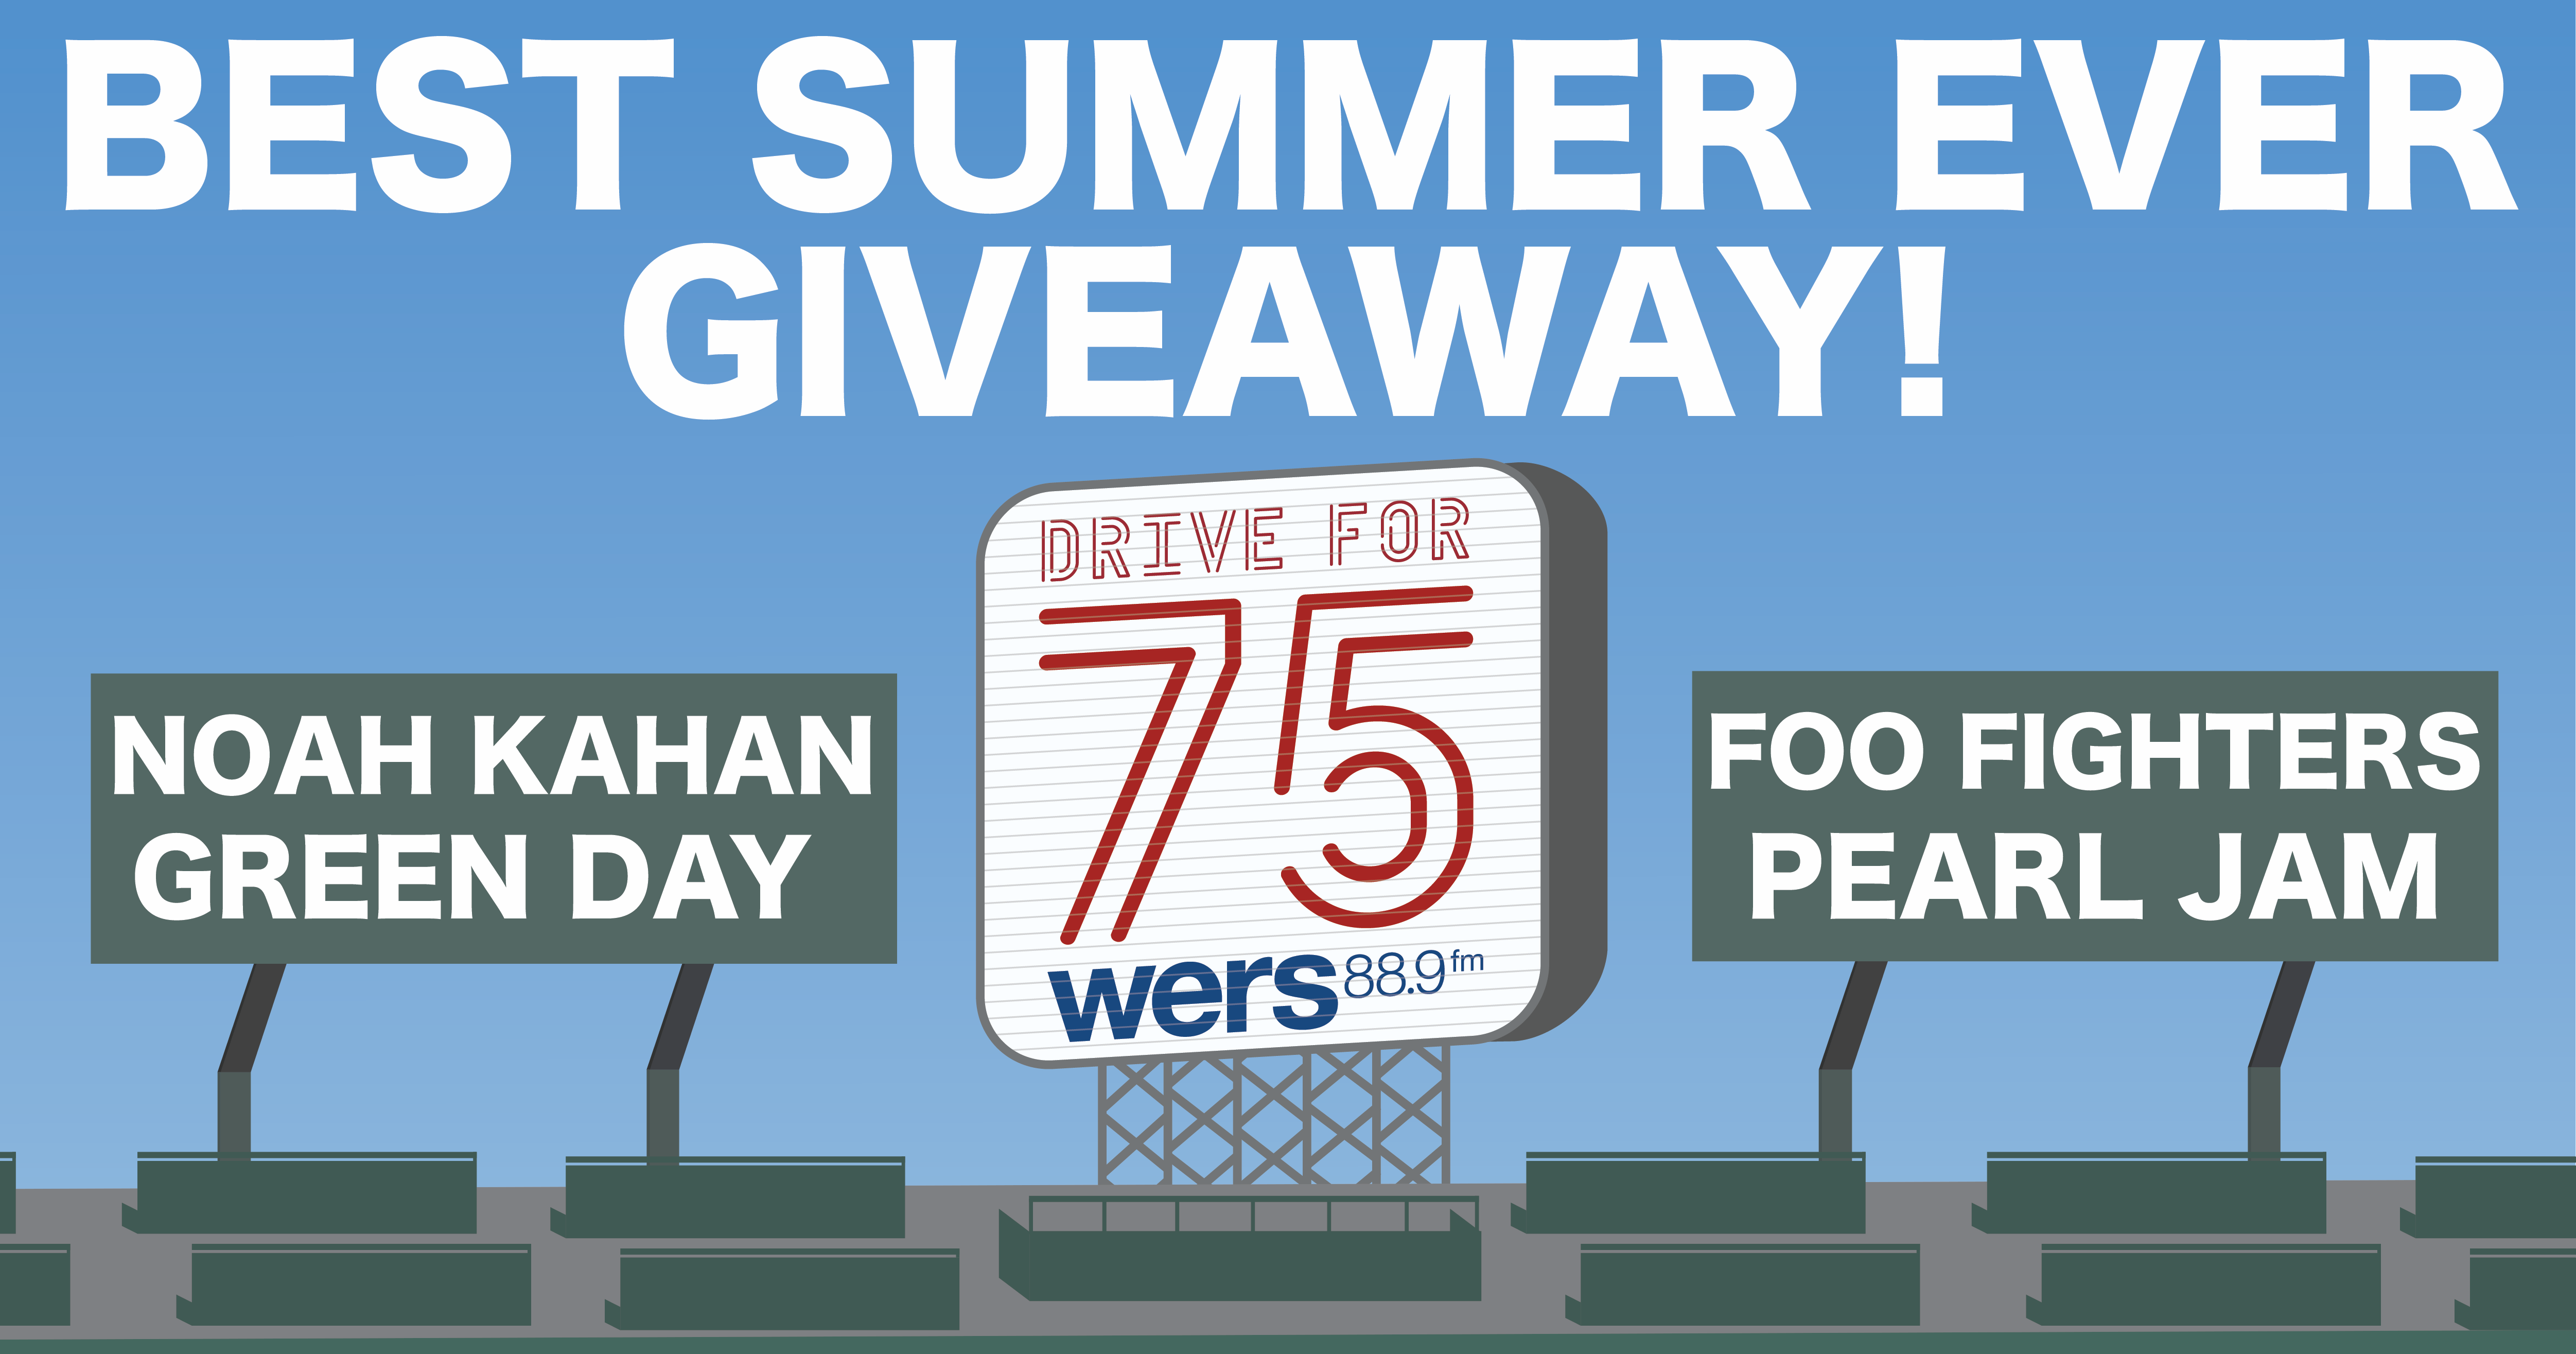 Best Summer Ever art contains the 75 in a Citgo-looking sign with a baseball park stadium showing signs for Noah Kahan, Green Day, Foo Fighters, and Pearl Jam